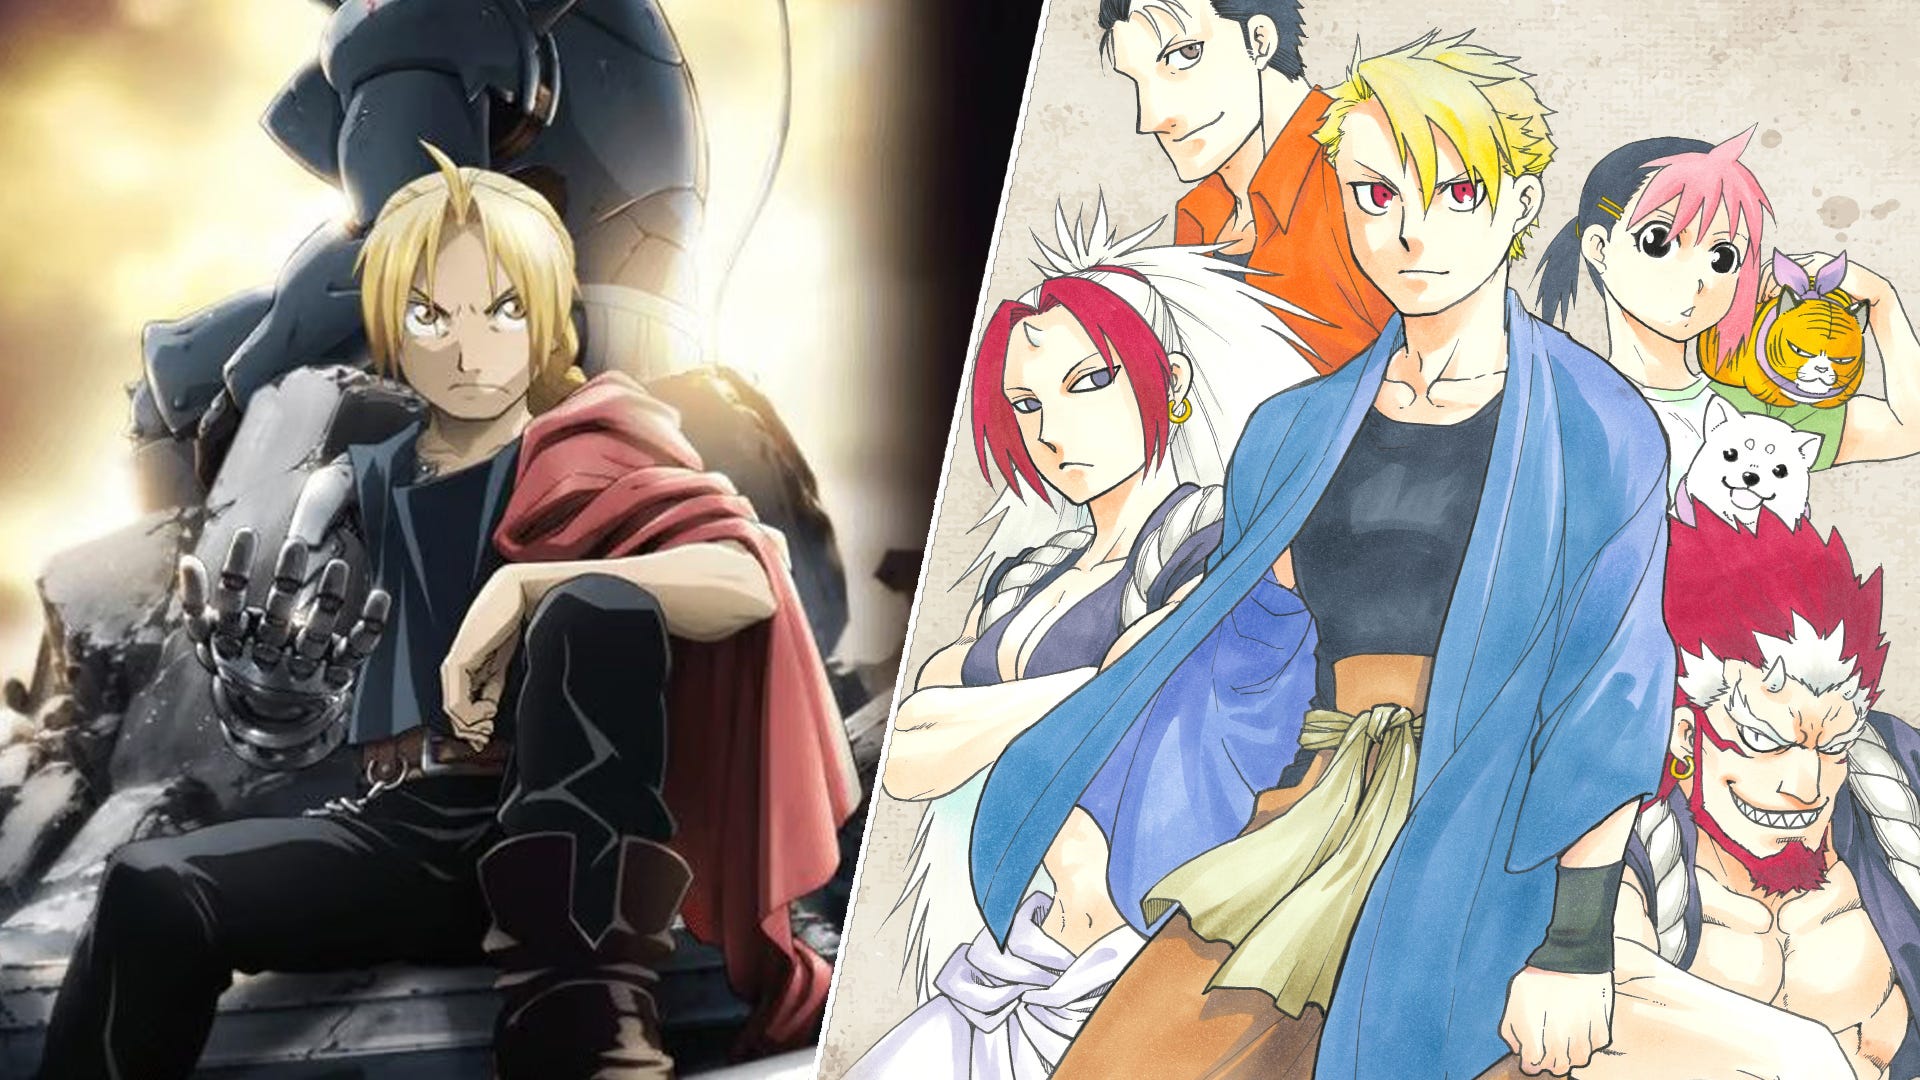 Fullmetal Alchemist fans are doing themselves a disservice by not reading its creator's latest manga